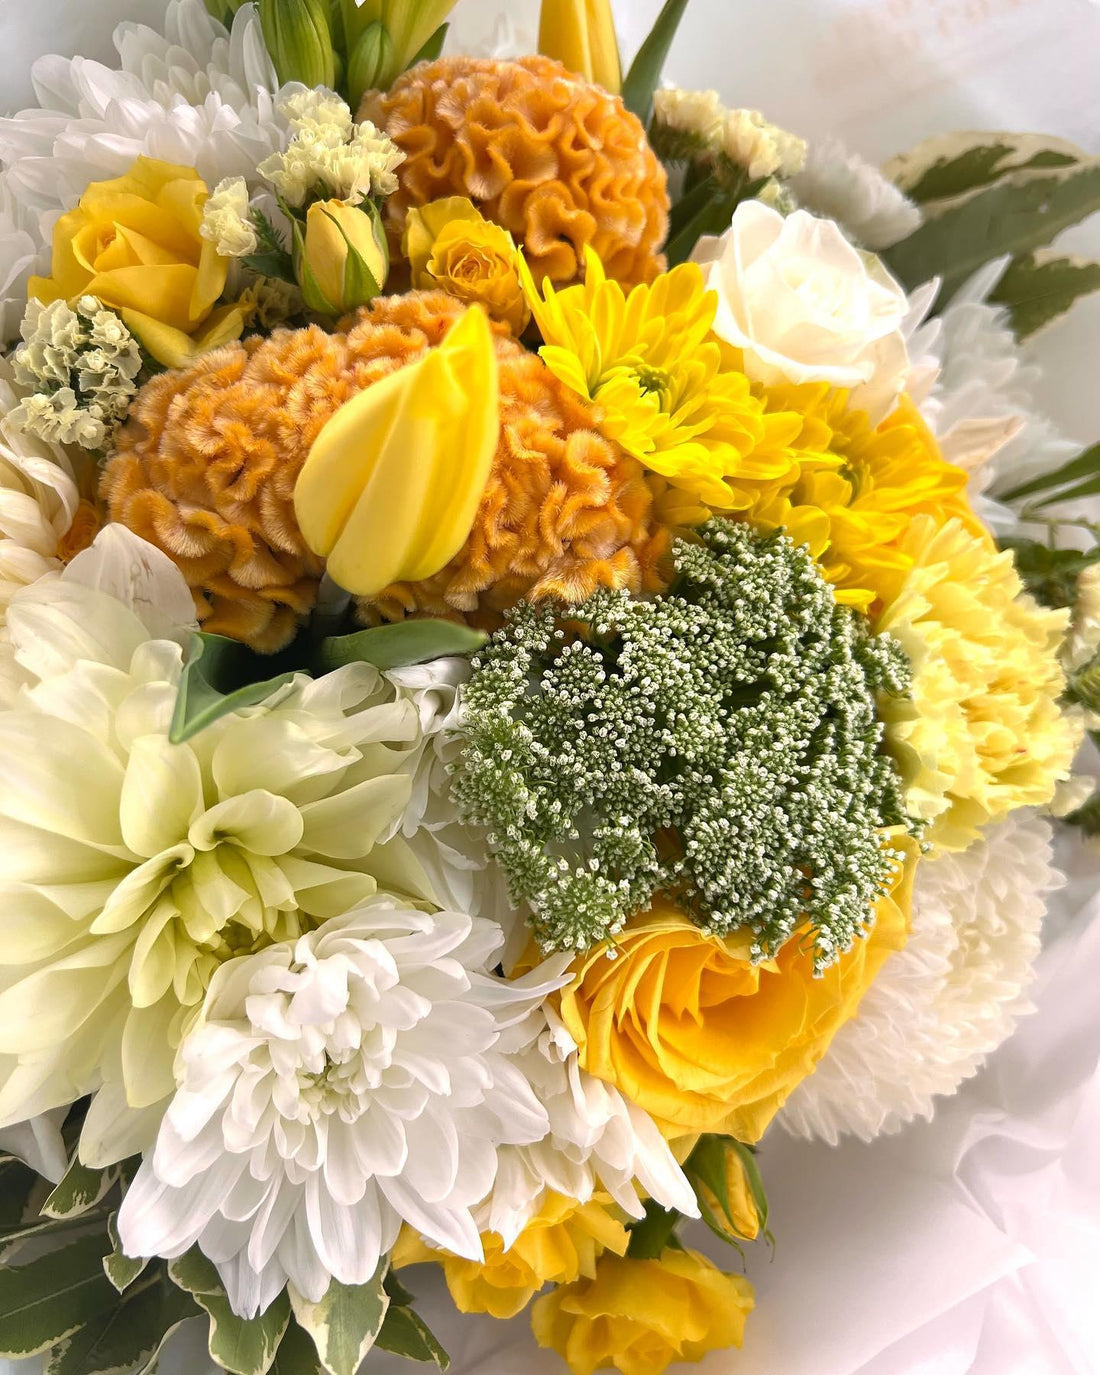 L I M O N C E L L O

Add some sunshine to this gloomy day ✨

Head to our website to order your flo made with love by Flowers Gold Coast www.flowersgoldcoast.com.au the Gold Coast's best Florist